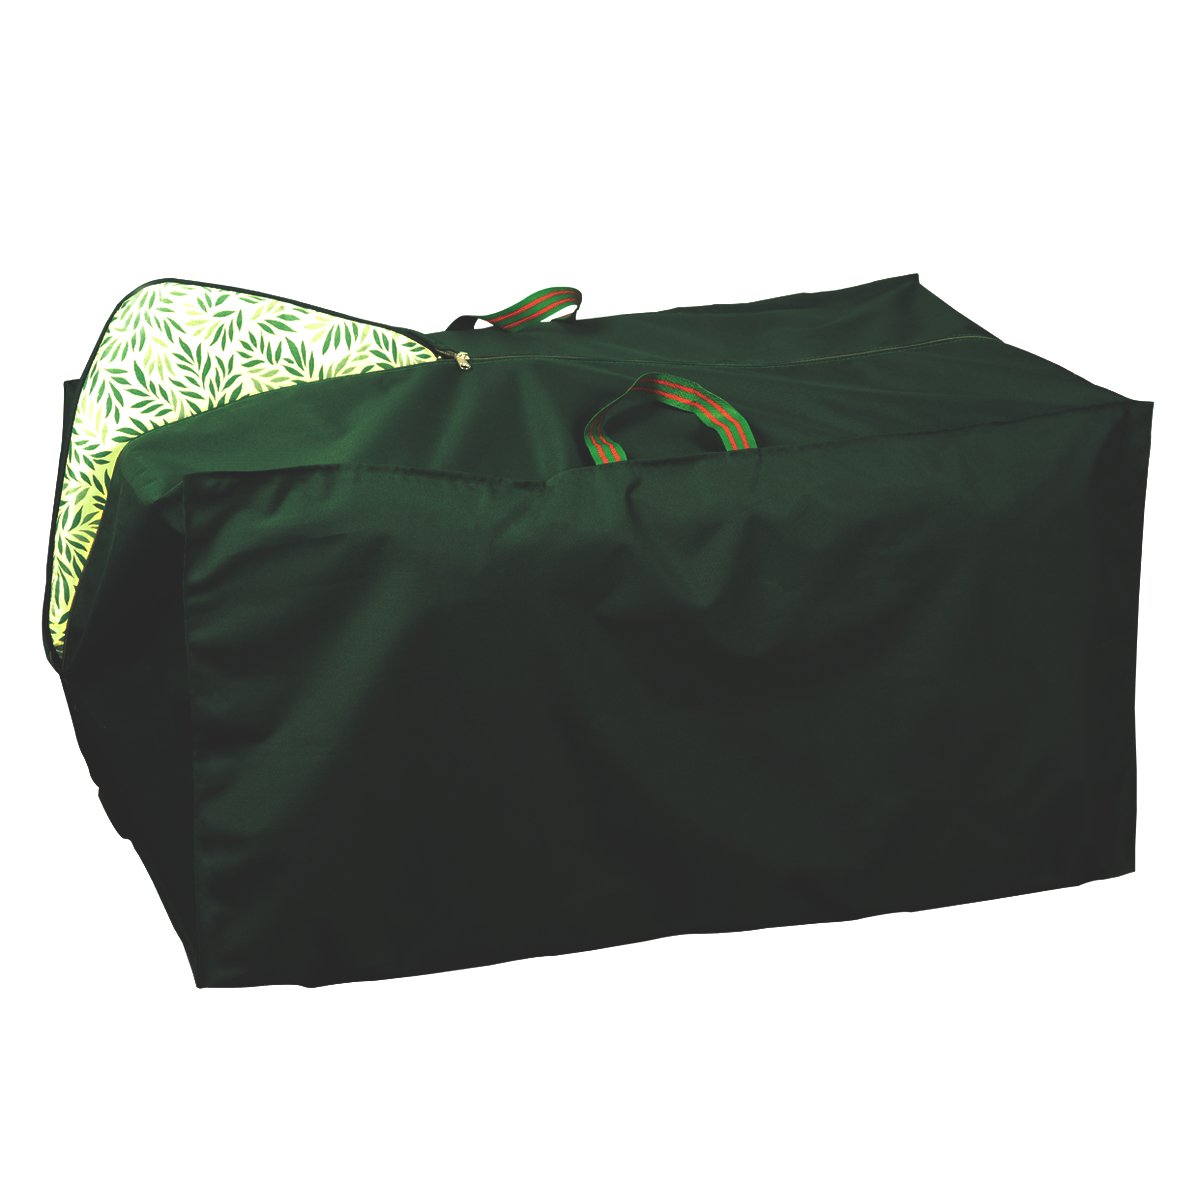 Bosmere Bosmere Protector 6000 Circular Table Top Cover With Drawstring 100% Waterproof 